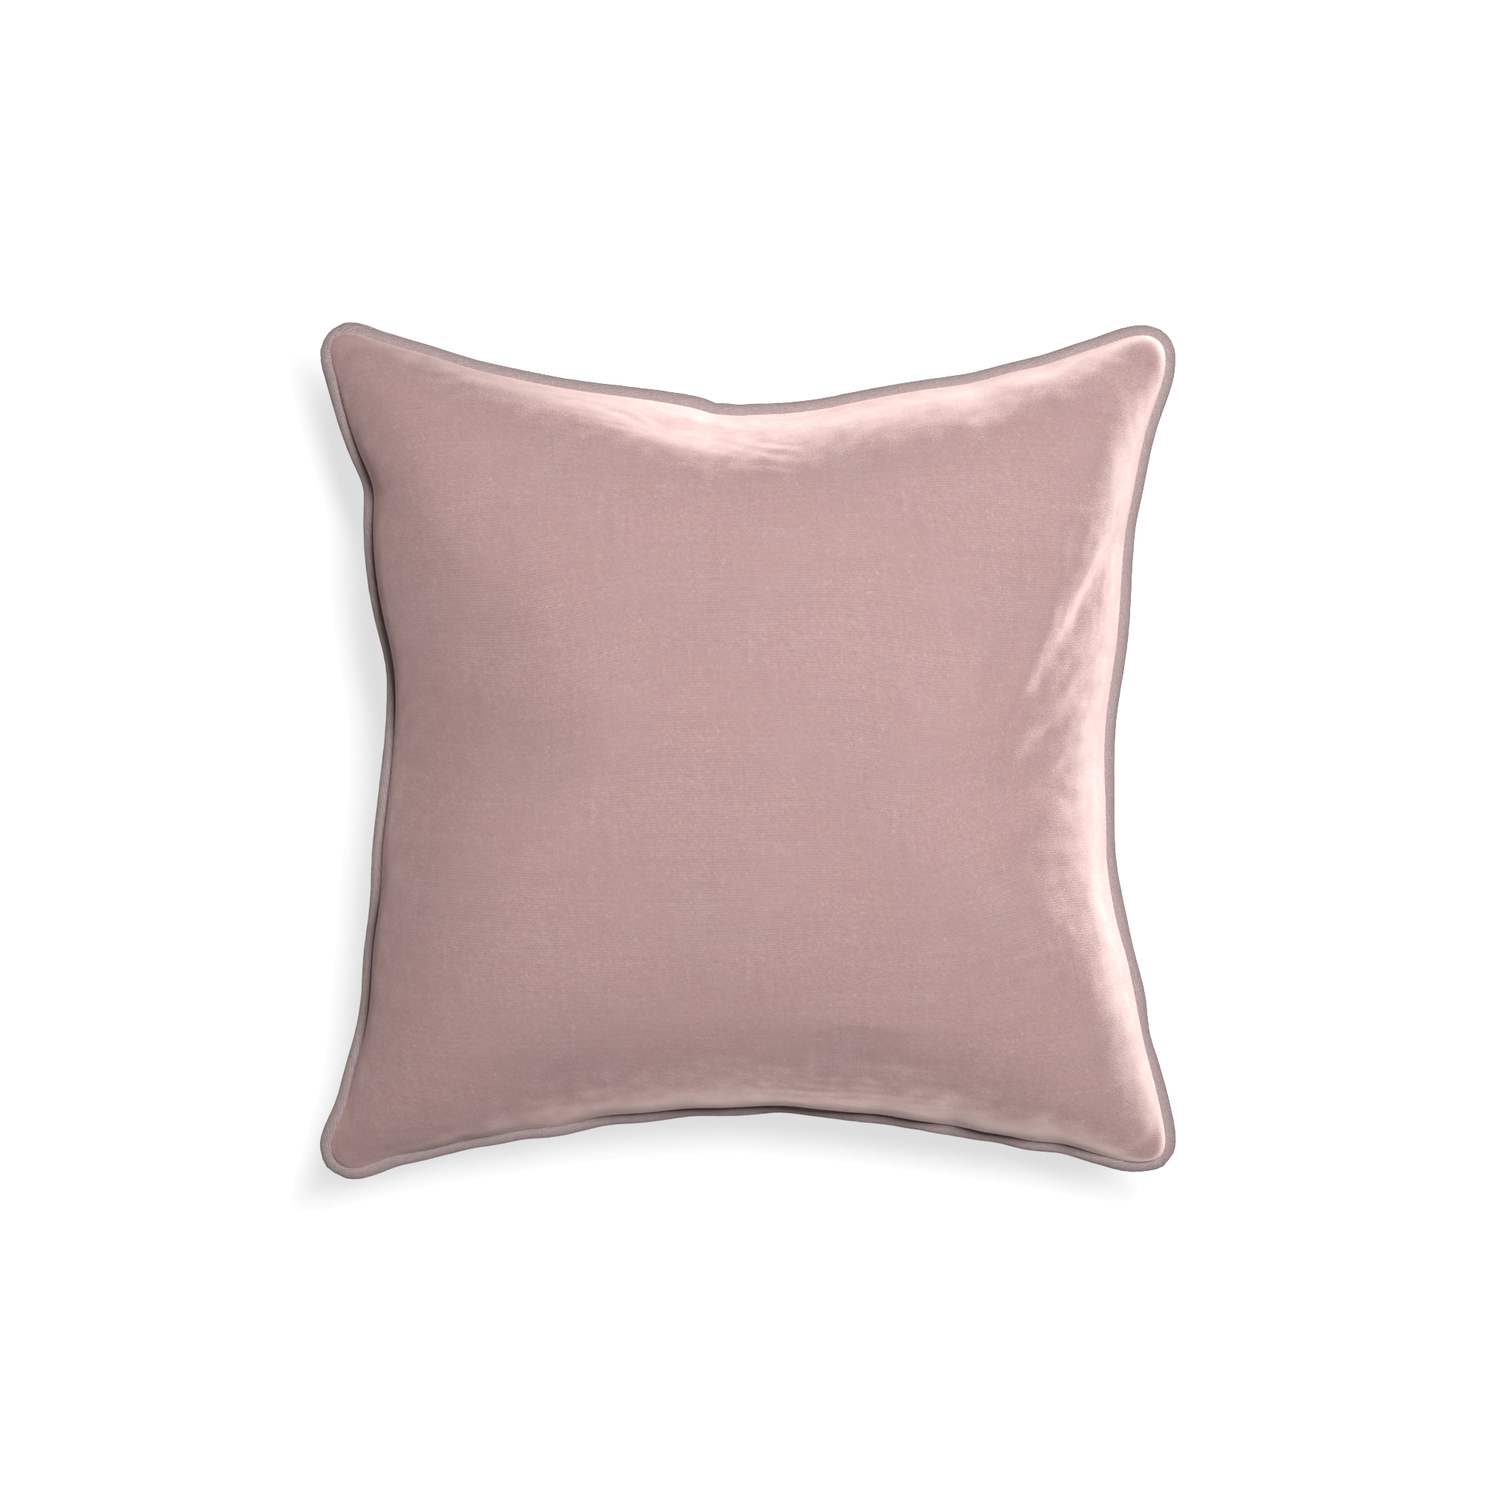 18-square mauve velvet custom mauvepillow with orchid piping on white background